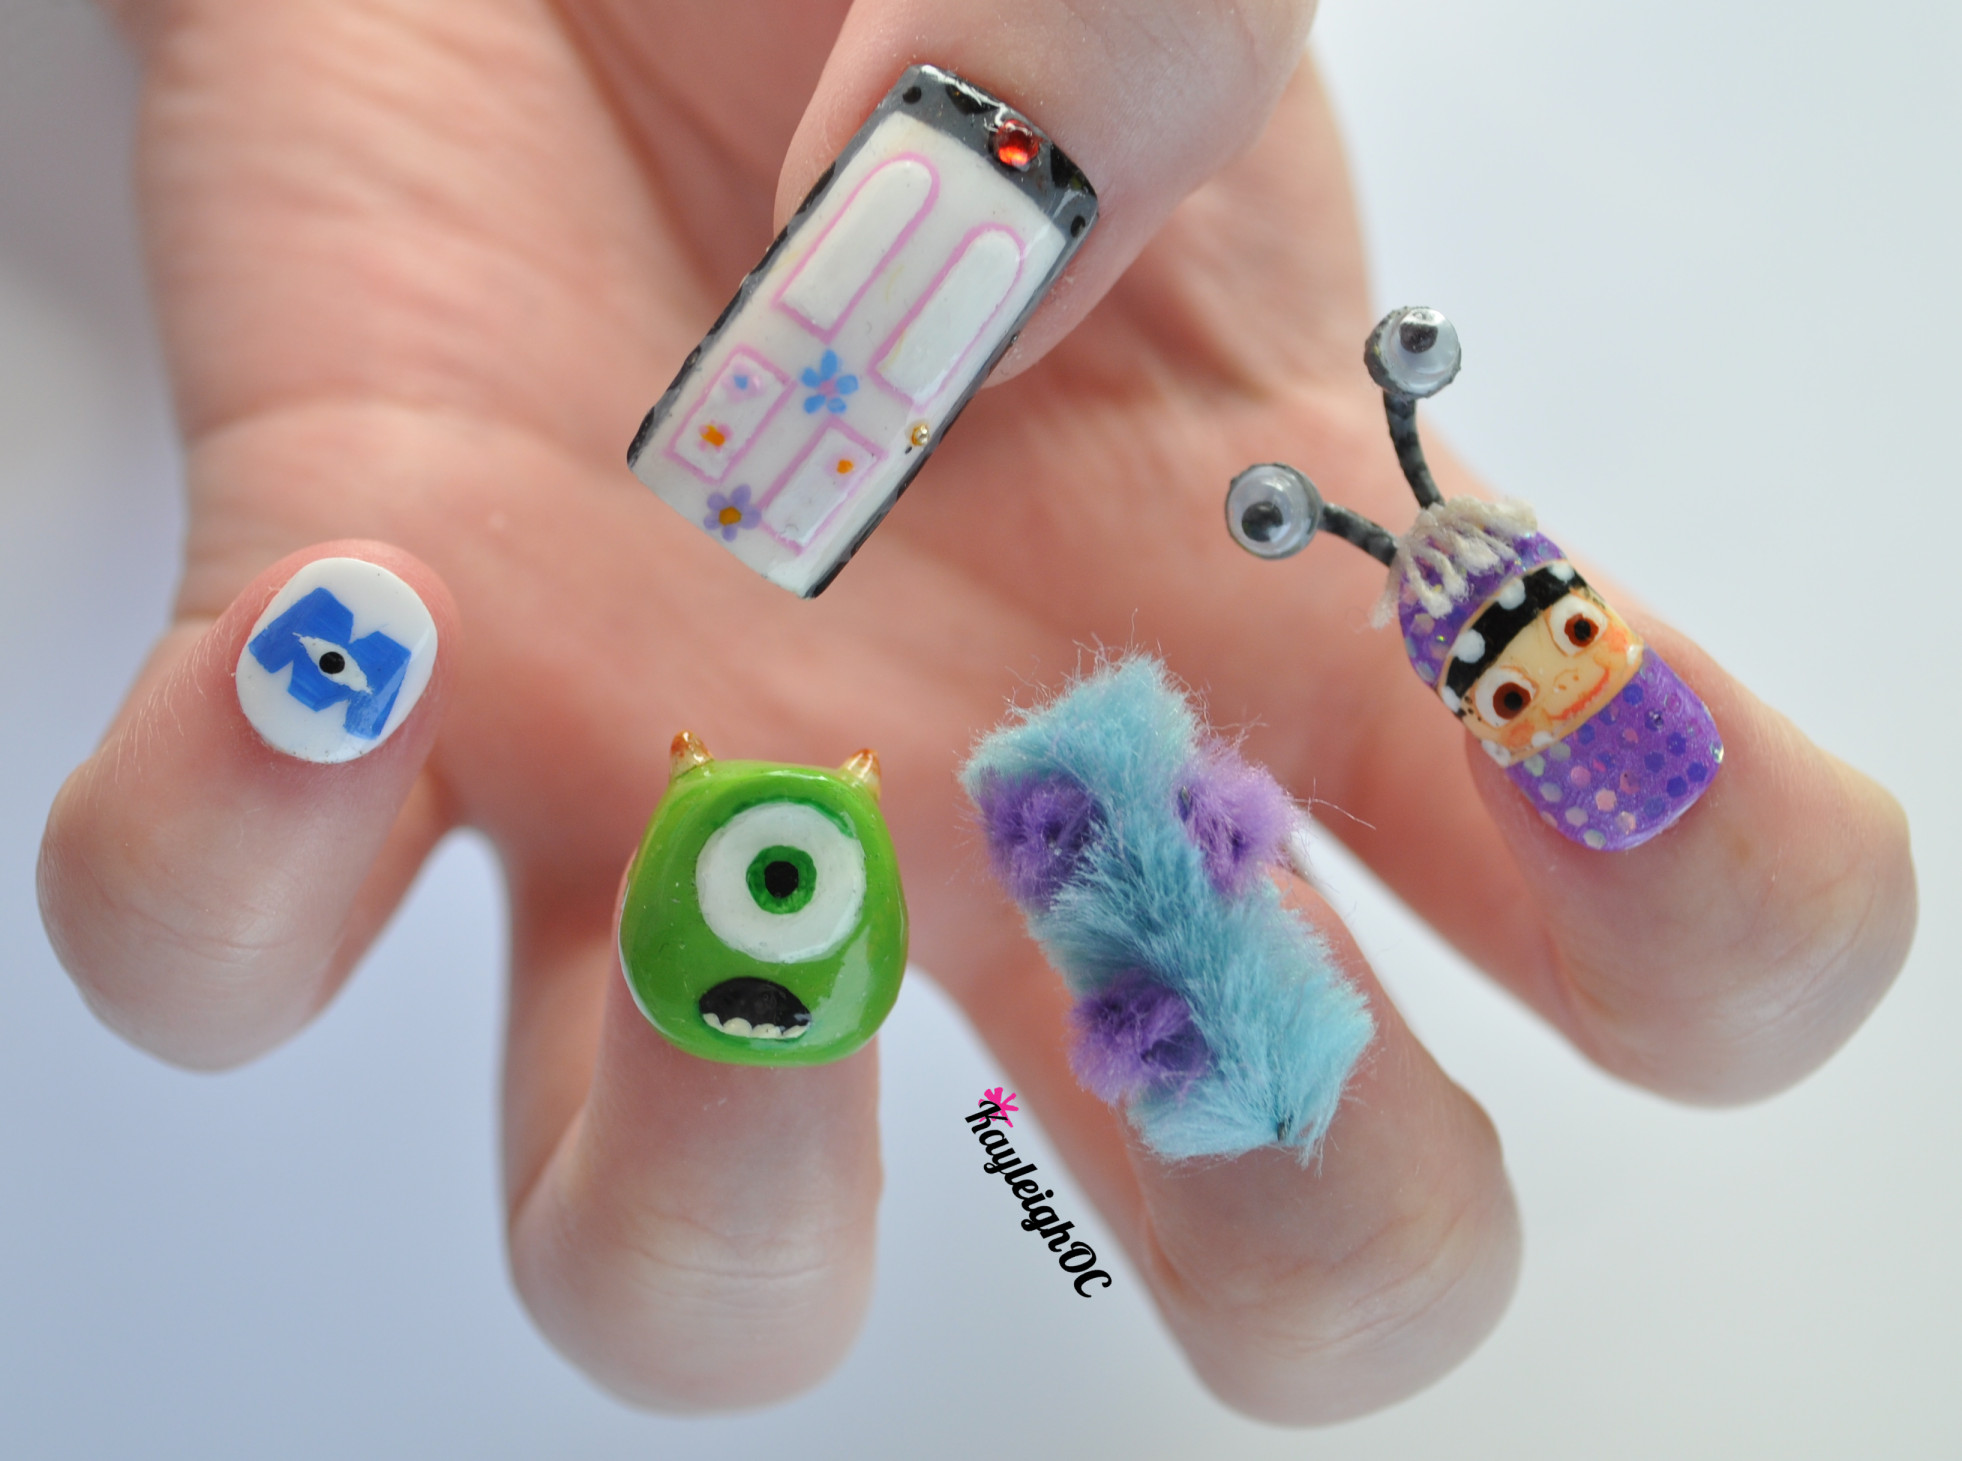 Monster Nail Designs
 Monsters Inc 3D Nail Art by KayleighOC on DeviantArt